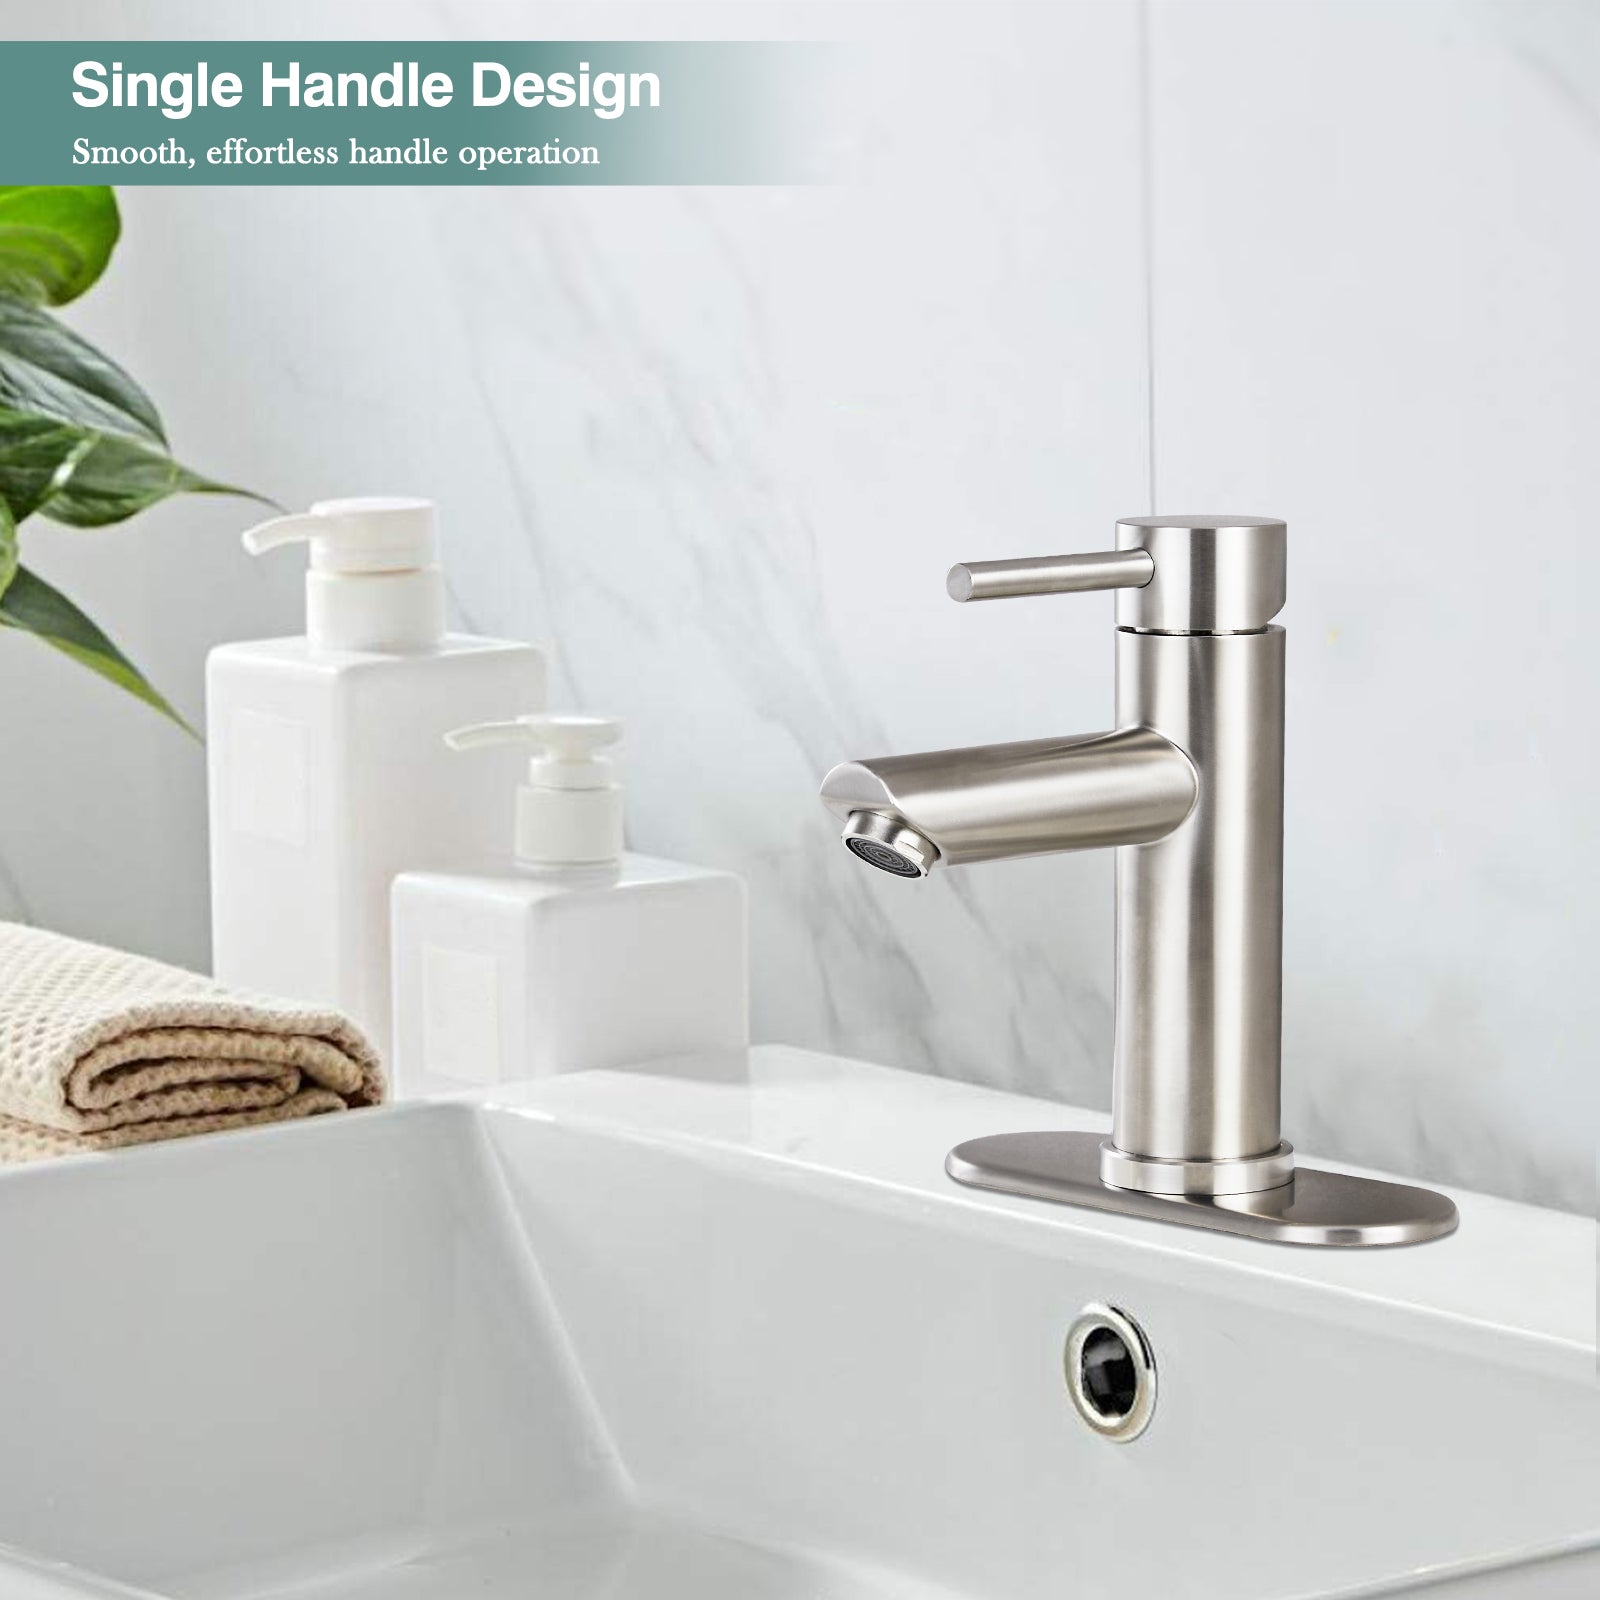 Heyalan Bathroom Sink Faucet Stainless Steel SUS304 Brushed Nickel Single Handle 1 Hole Hot and Cold Water Deck Mount Lavatory Faucet Kitchen Tap with Pop Up Drain